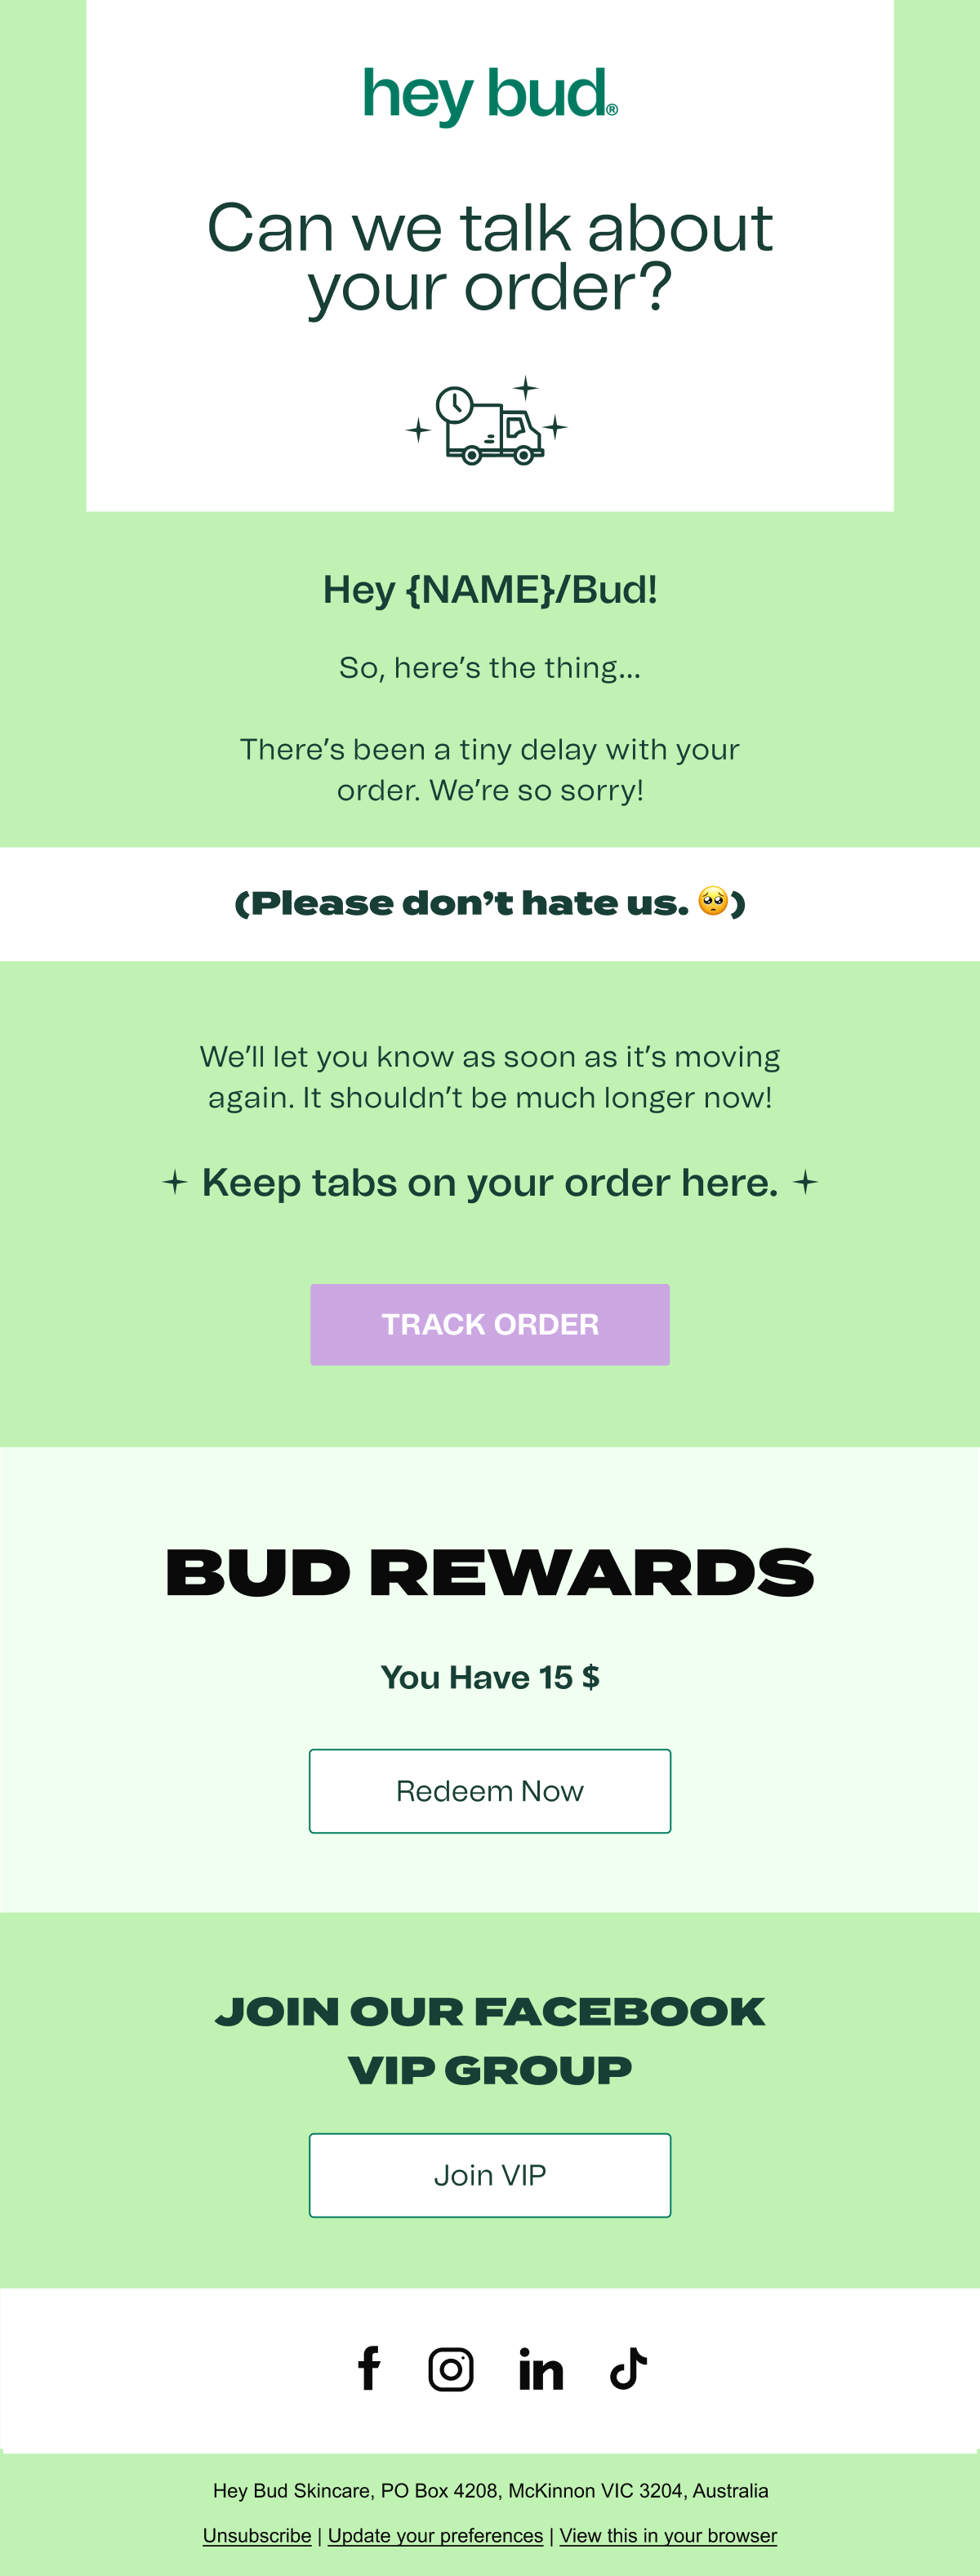 Hey Bud Delayed Shipment Notification Industry Email Template screenshot